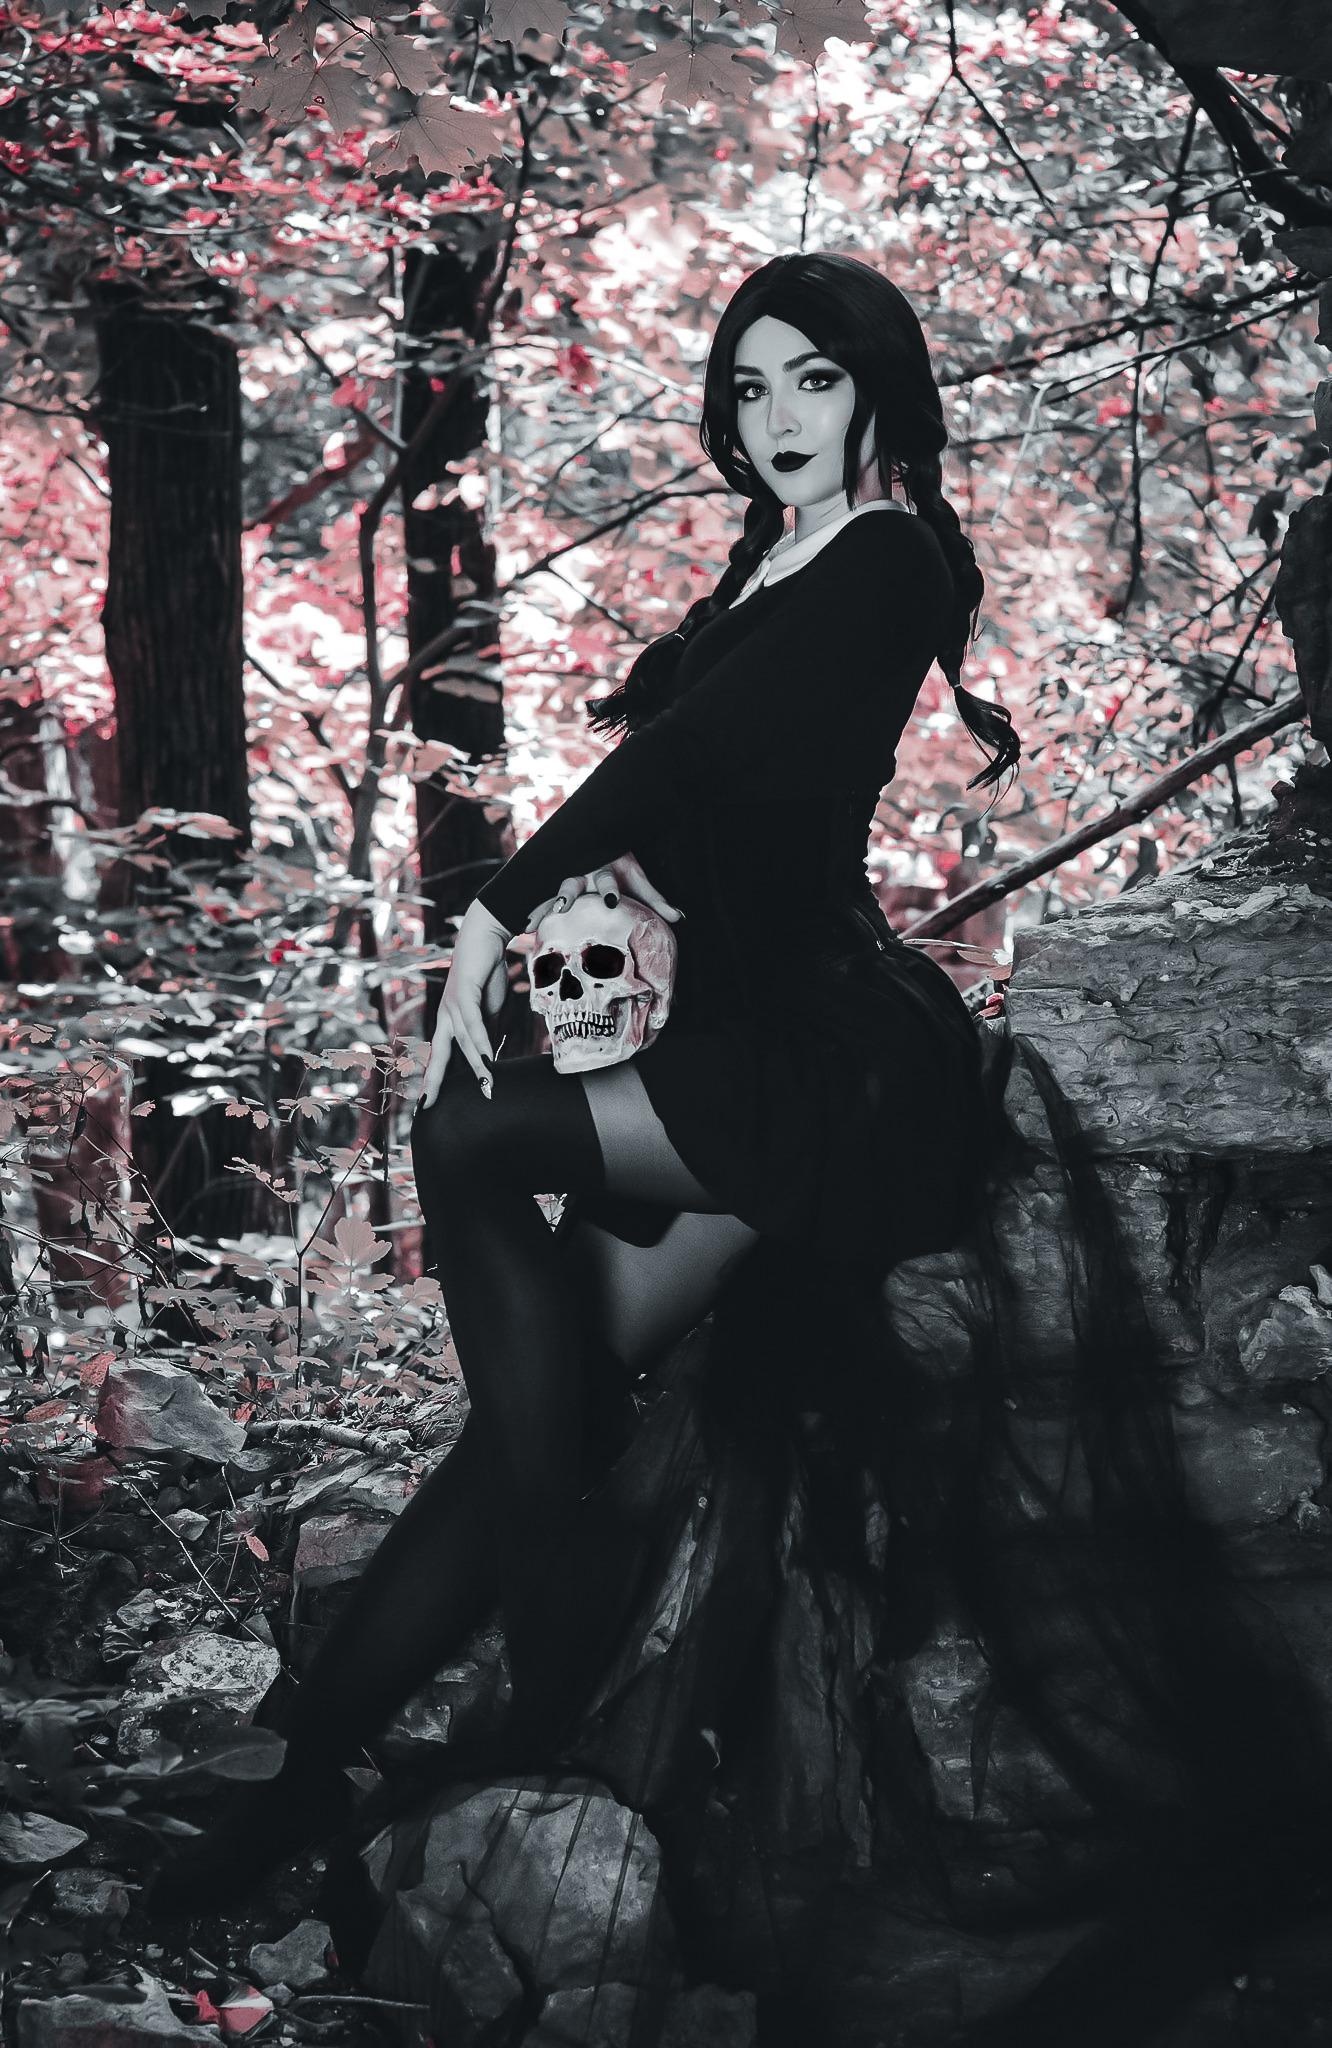 Goth Girl: Gothic fashion, Spooky look, Adams family, Wednesday Friday Addams with scull. 1340x2050 HD Wallpaper.